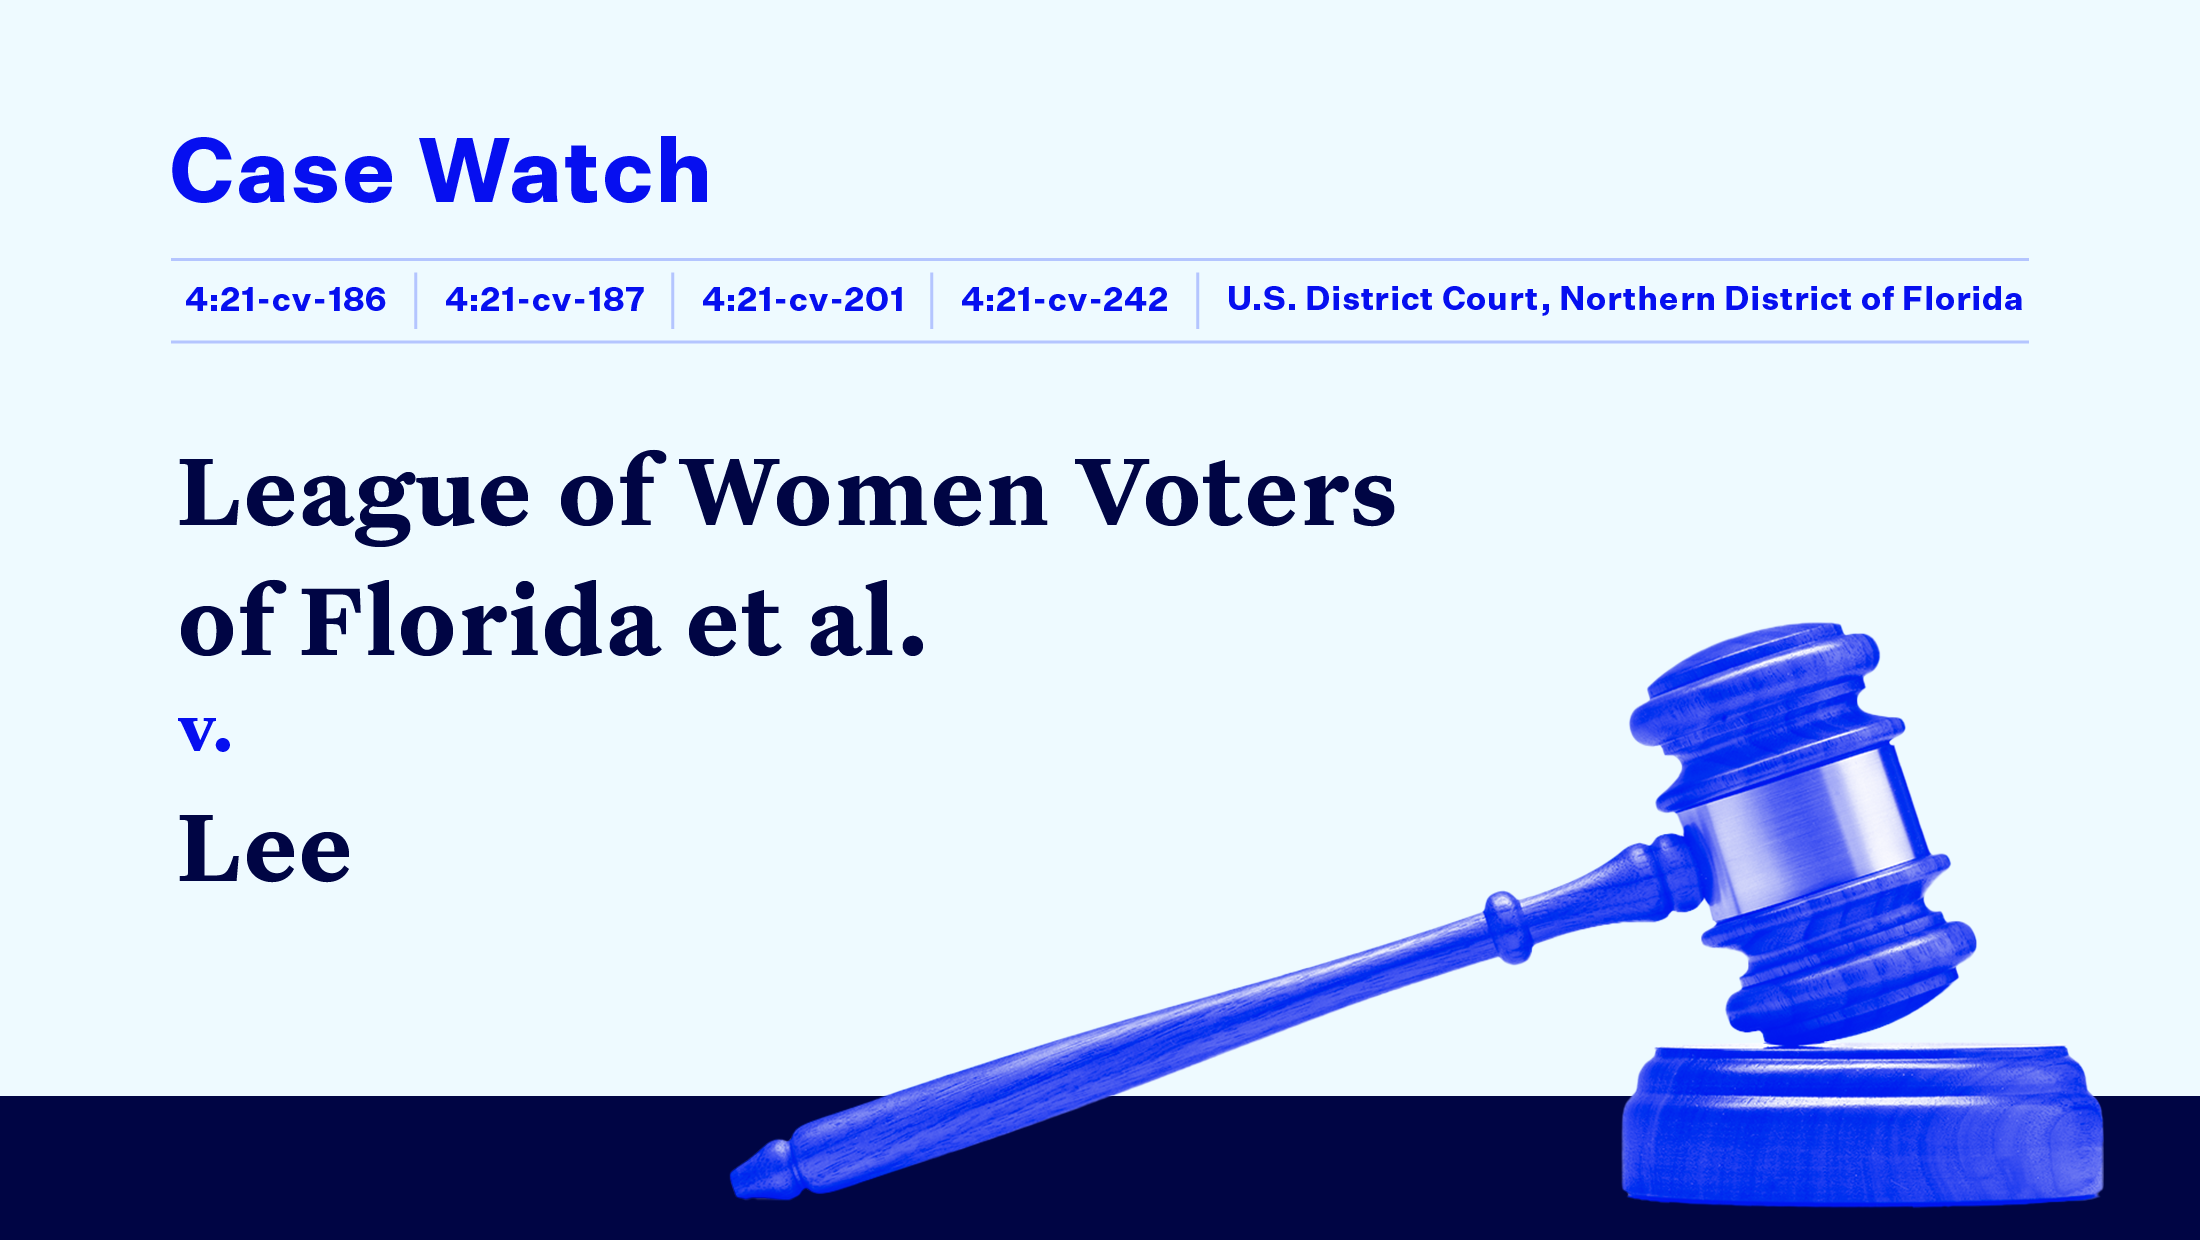 "CASE WATCH League of Women Voters of Florida et al. vs Lee" and other case-specific text, including the file number and court name, with a blue-tinted gavel